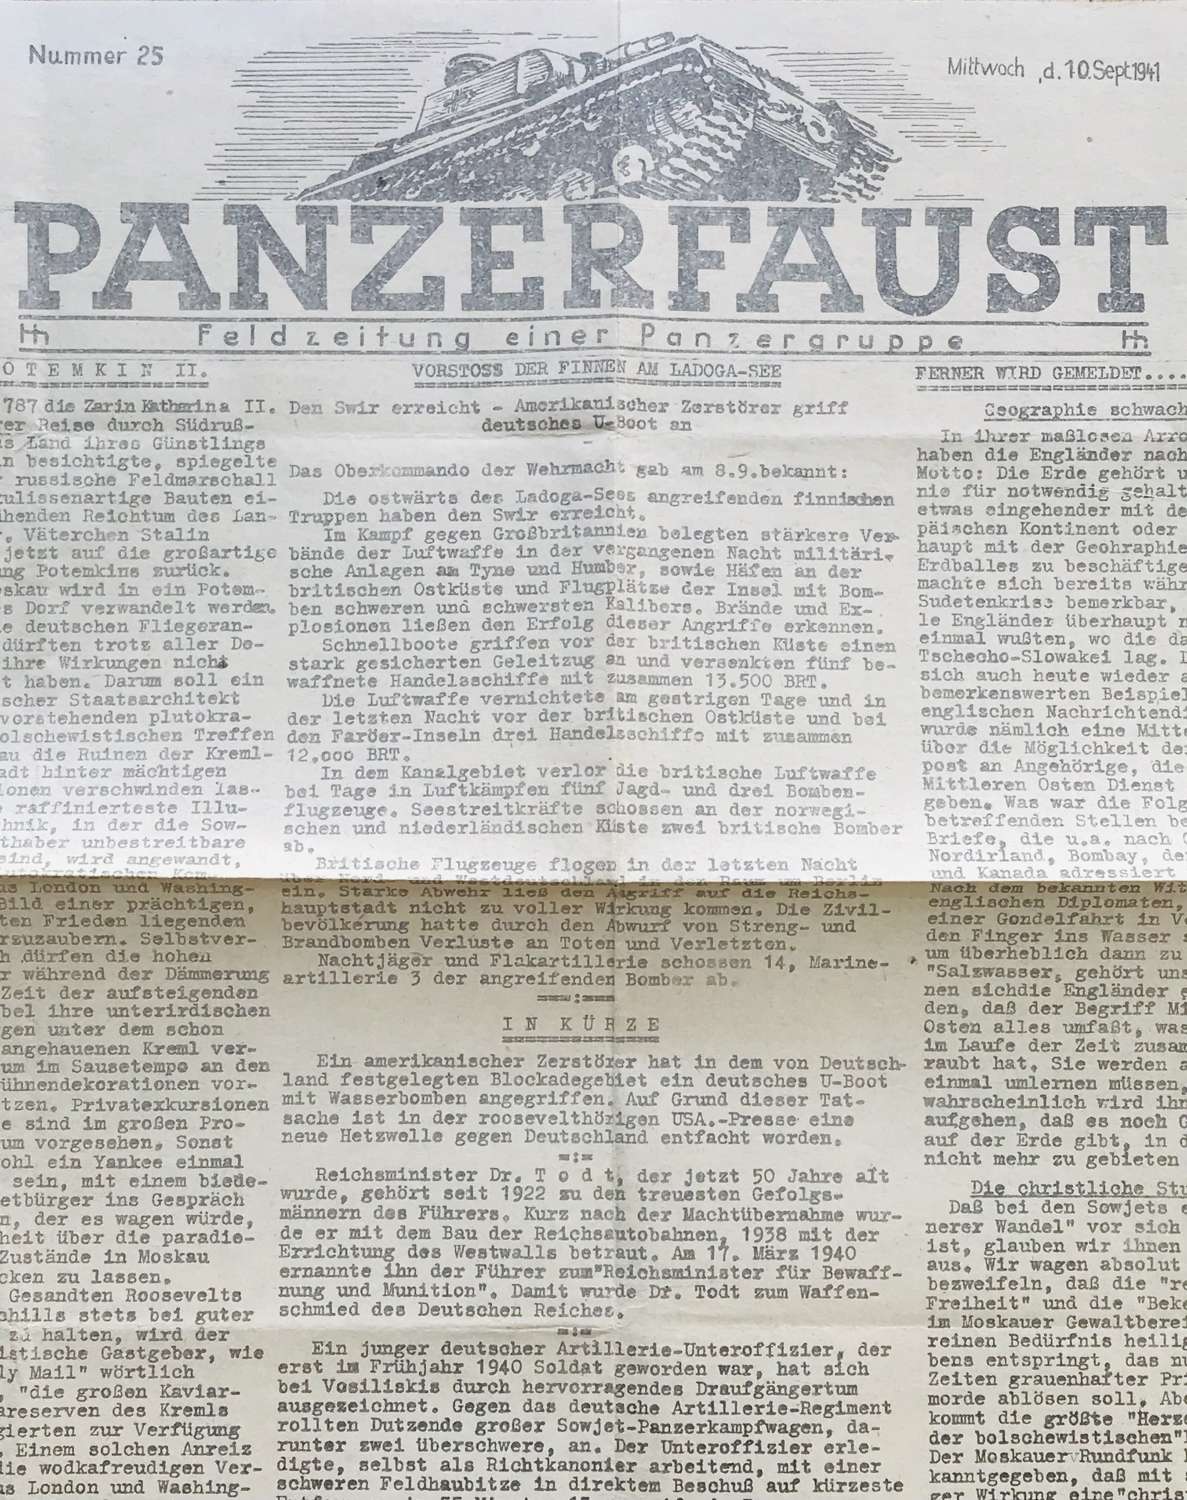 Panzerfaust Unofficial newspaper of the panzer troops